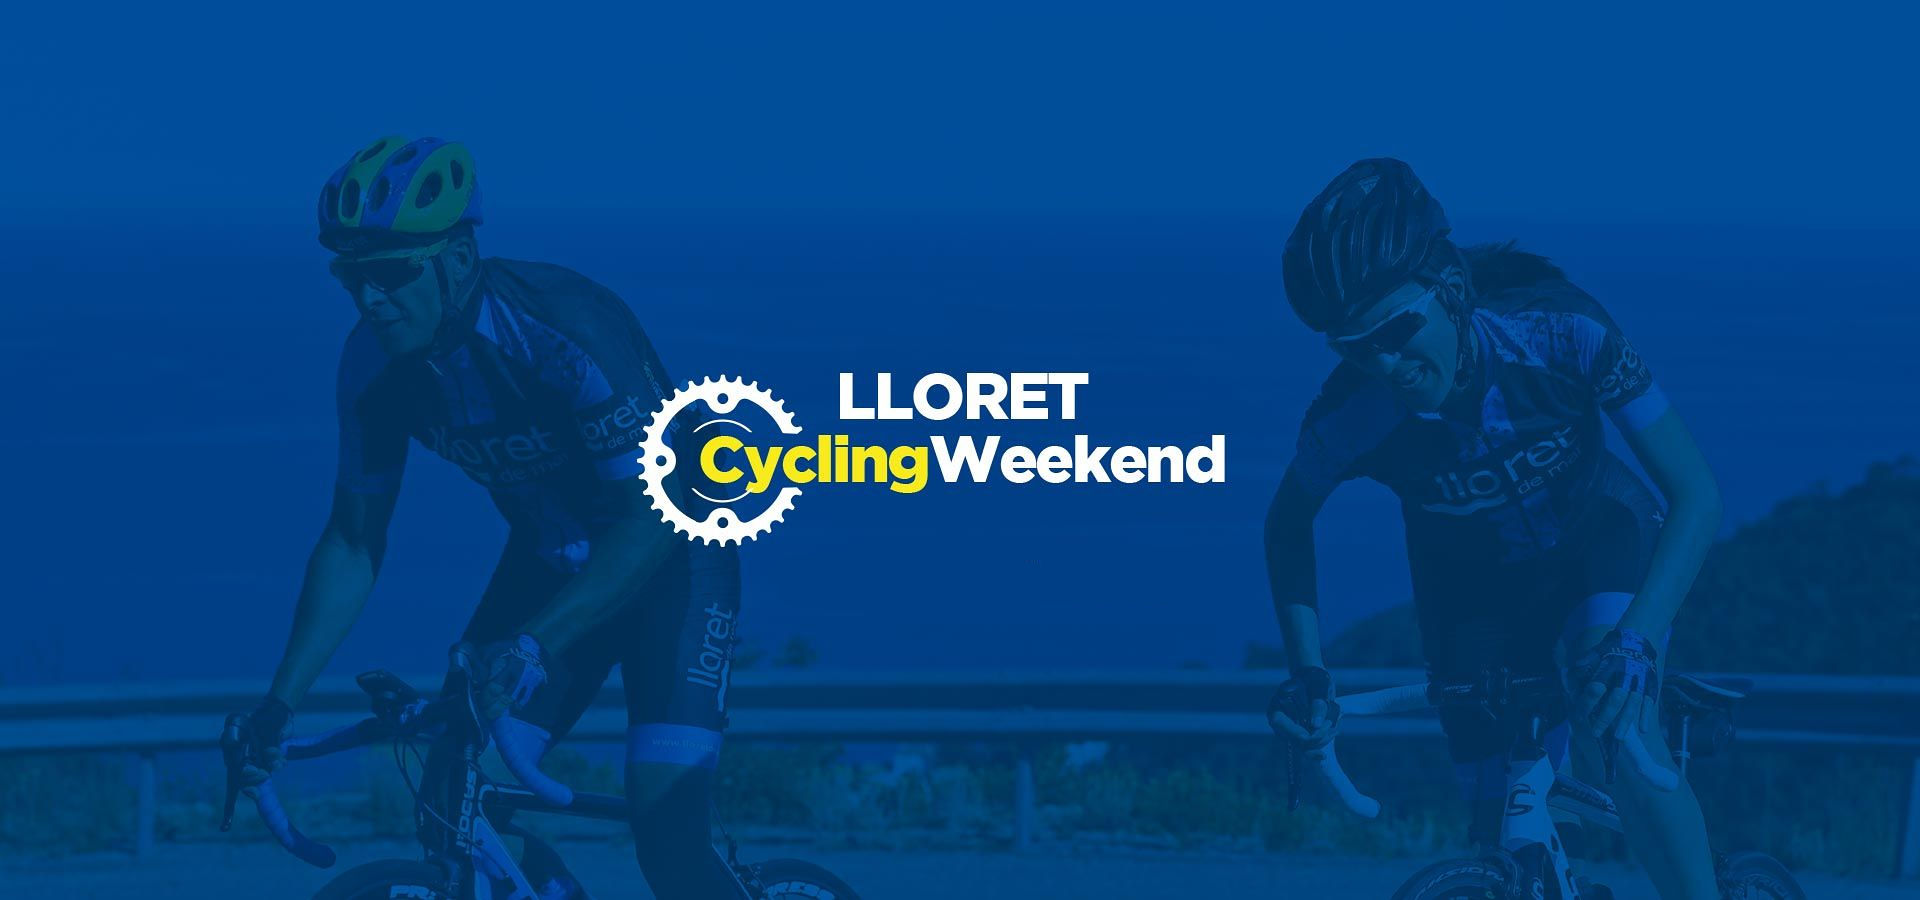  Lloret Cycling Weekend 2019